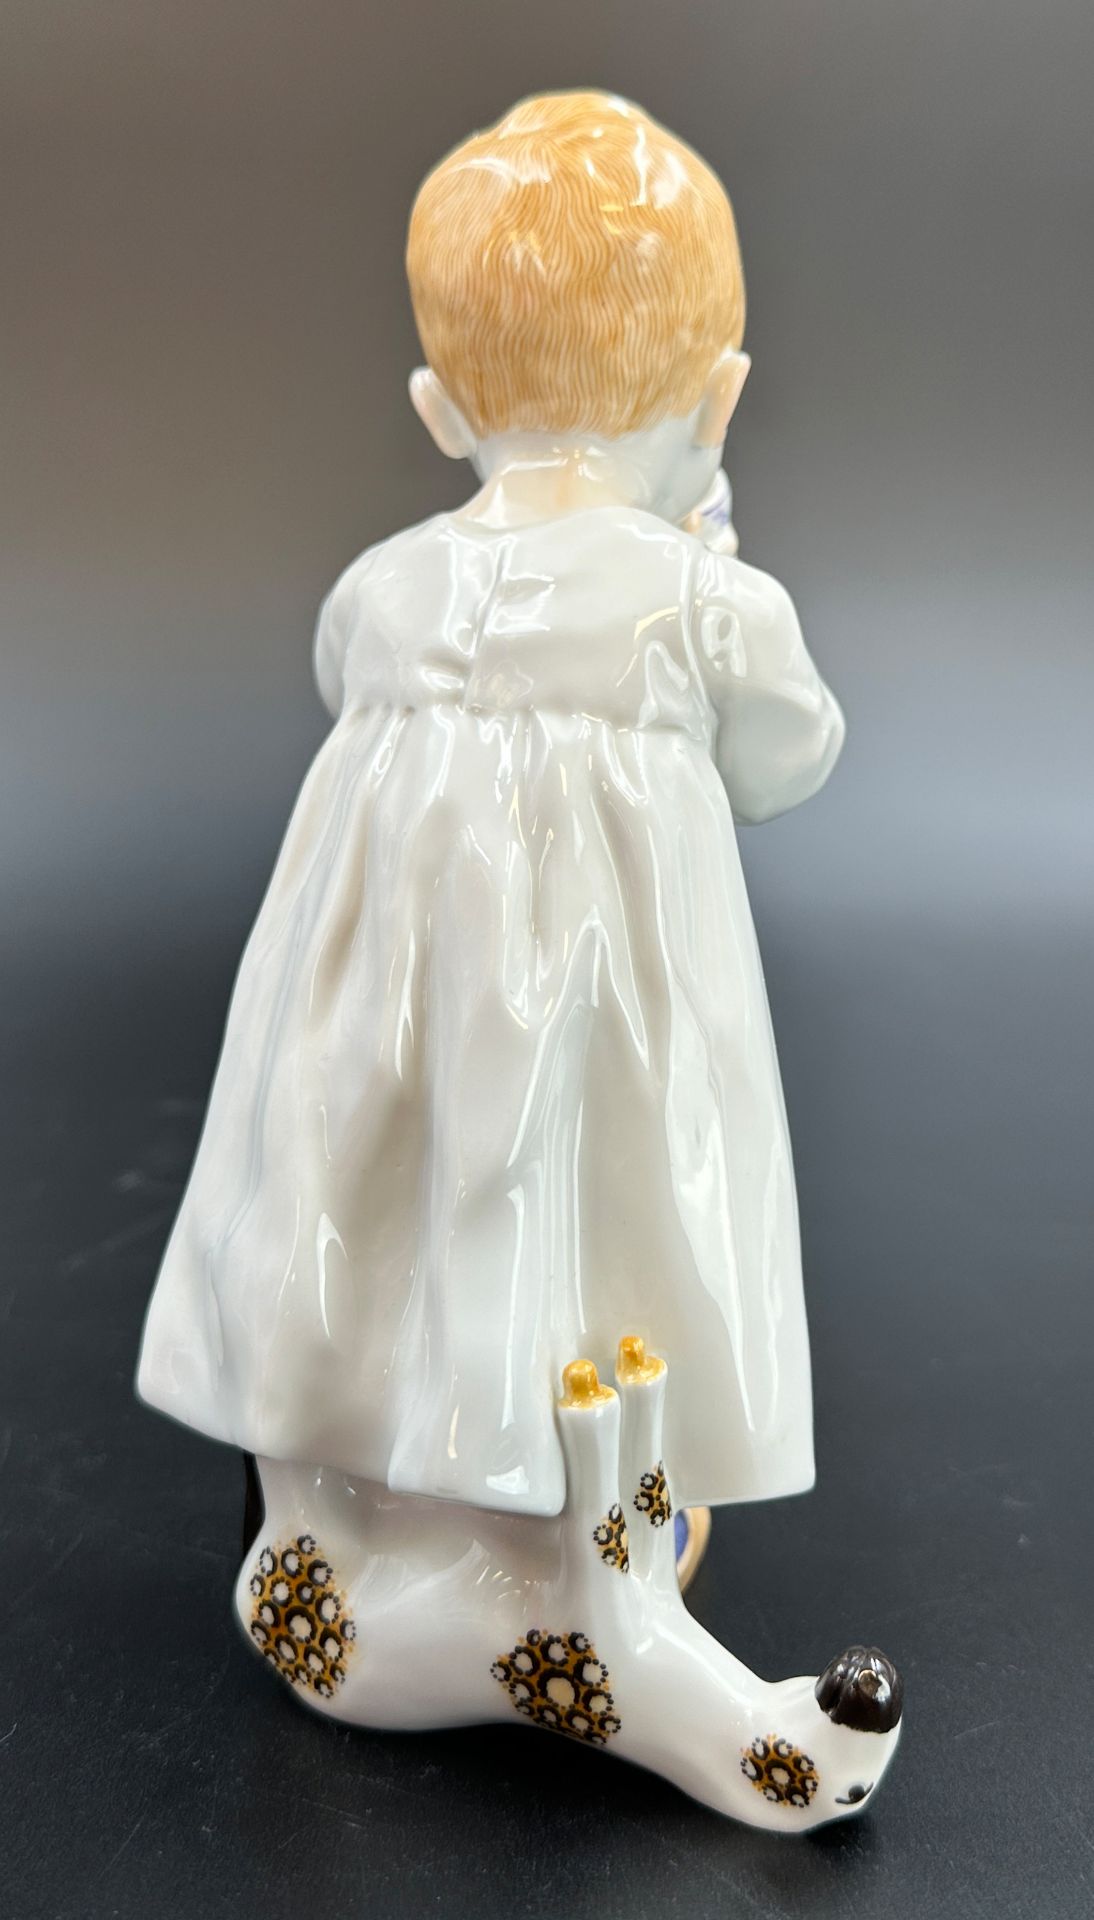 Hentschelkind. MEISSEN. "Child with cup". 1st choice. 1980s. - Image 6 of 11